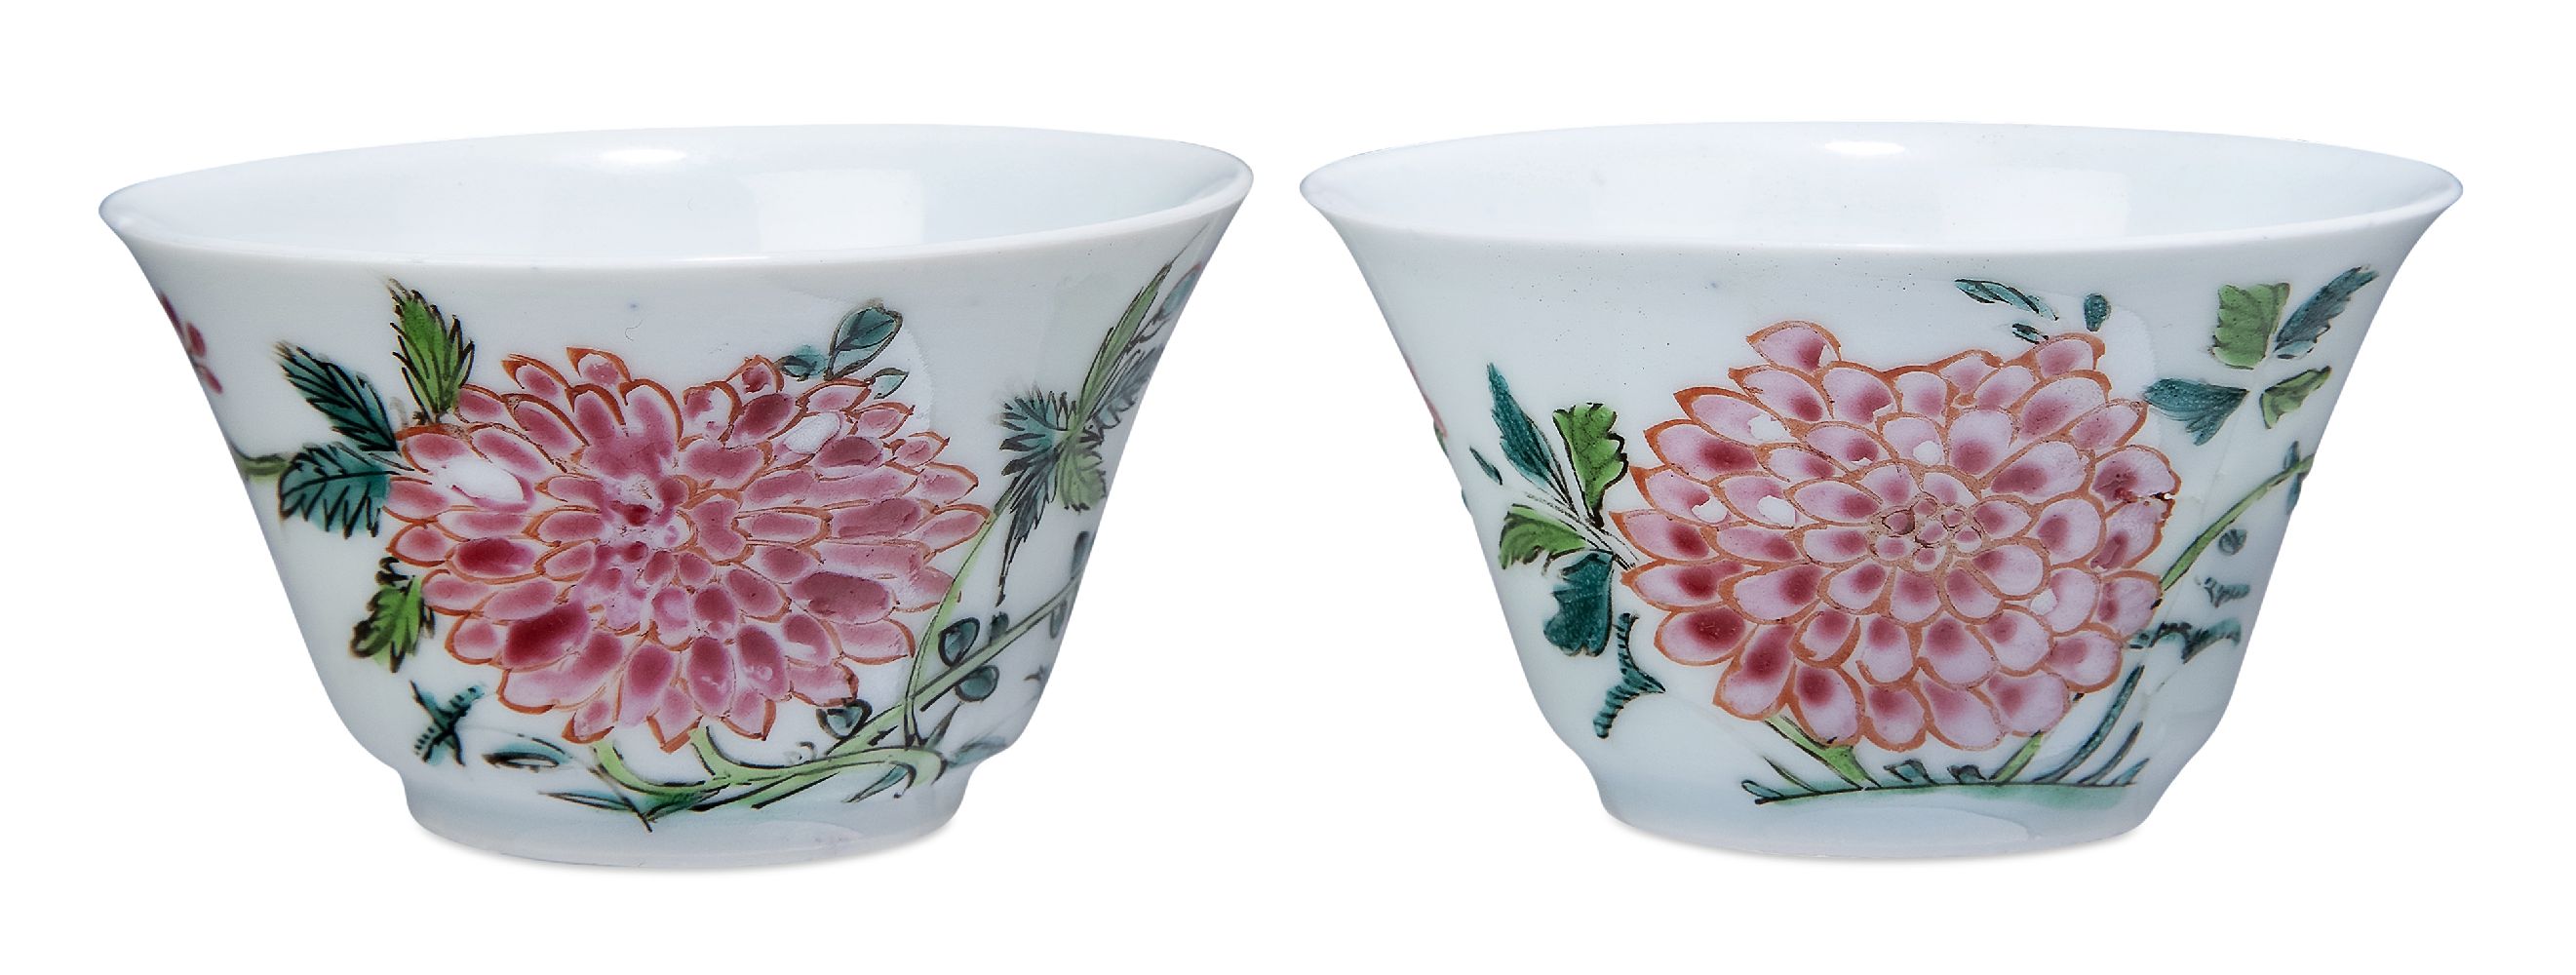 A pair of Chinese porcelain famille rose 'peony' cups, mid-19th century, painted with flowering